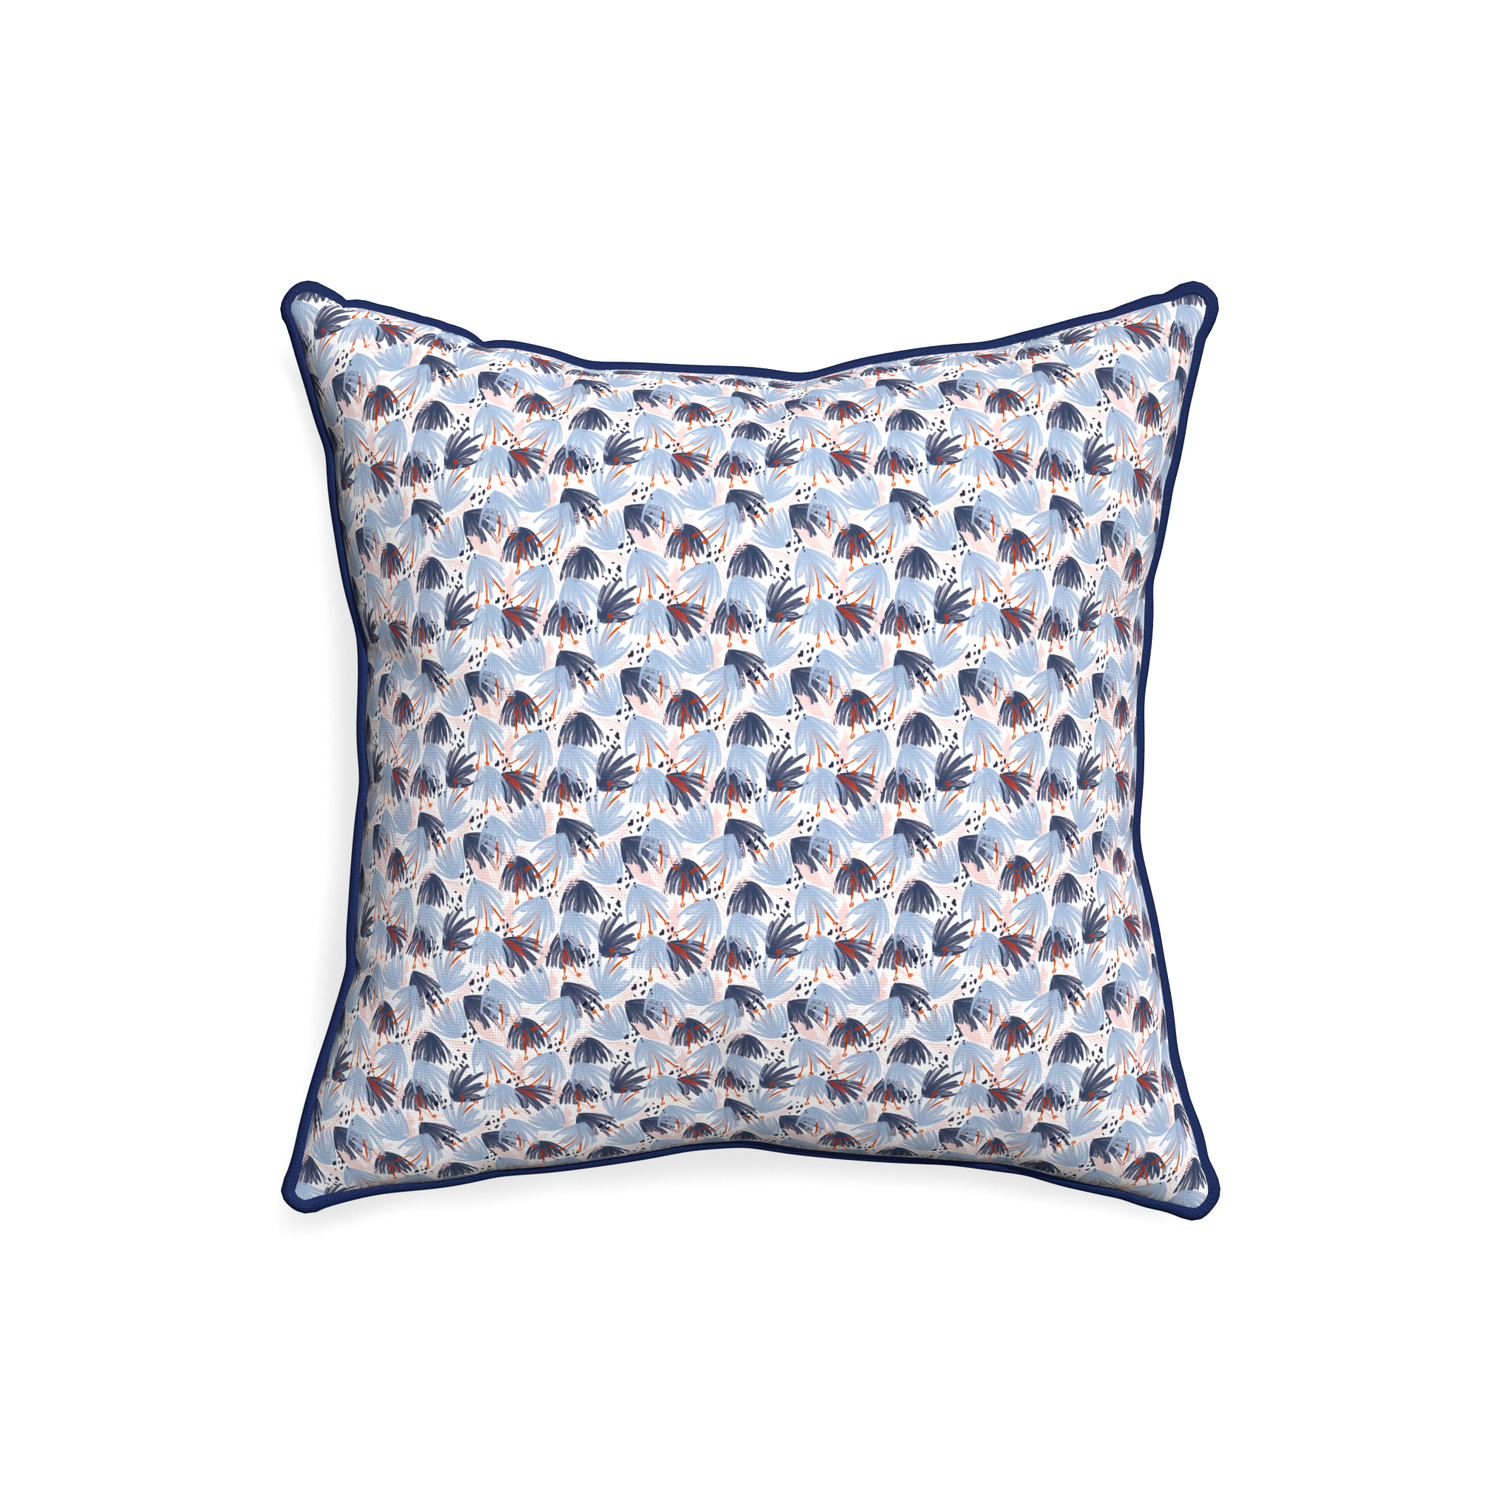 20-square eden blue custom pillow with midnight piping on white background